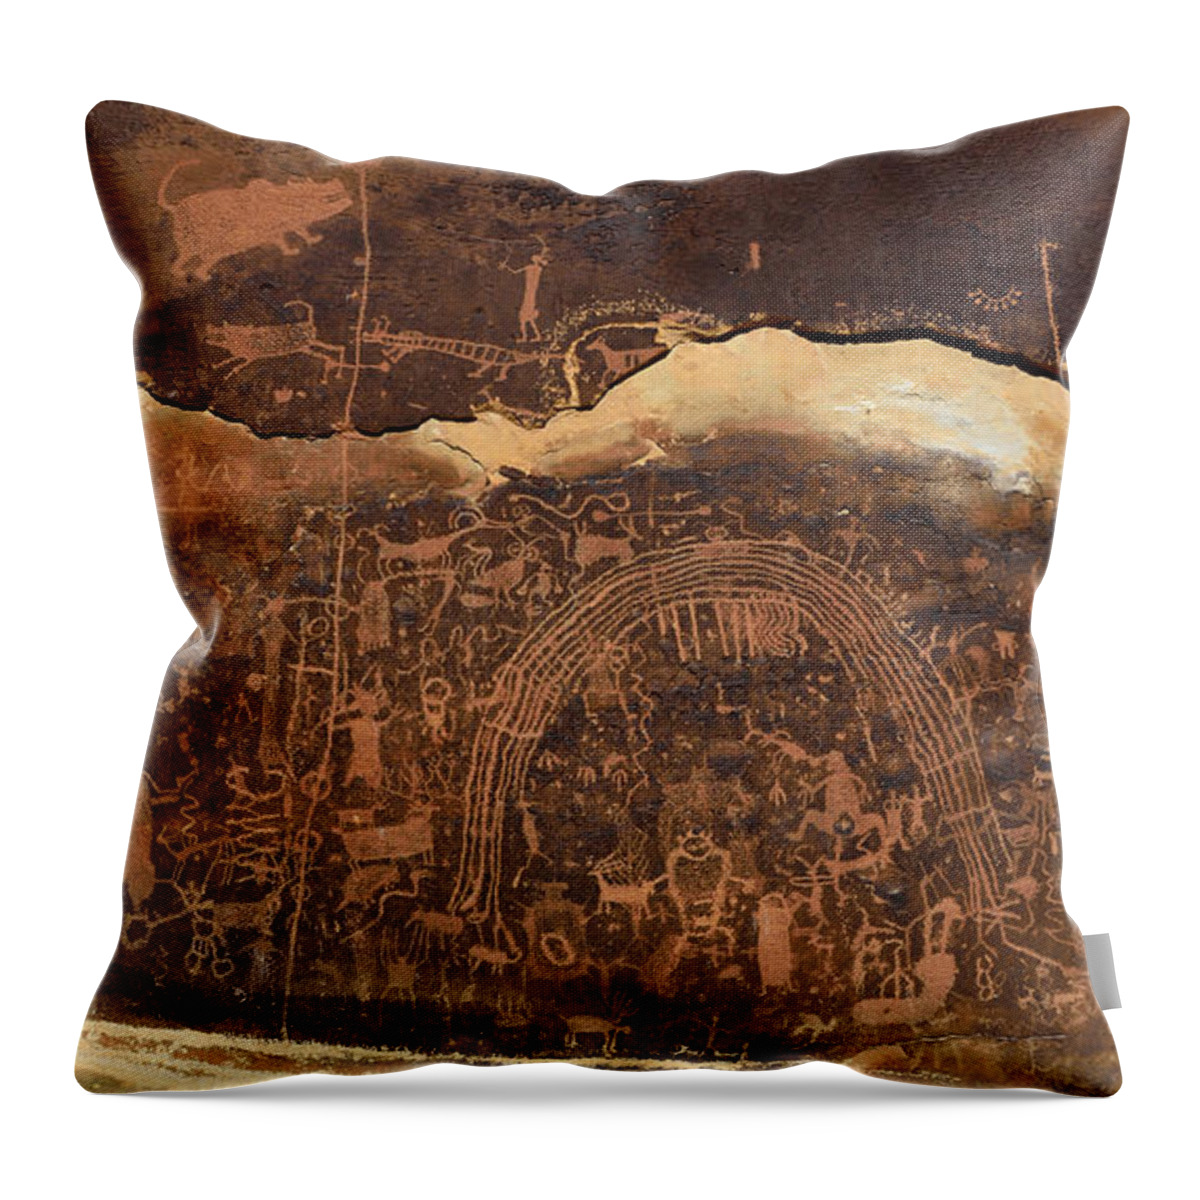 Rochester Throw Pillow featuring the photograph Rochester Creek Petroglyph Panel Cropped by Tranquil Light Photography